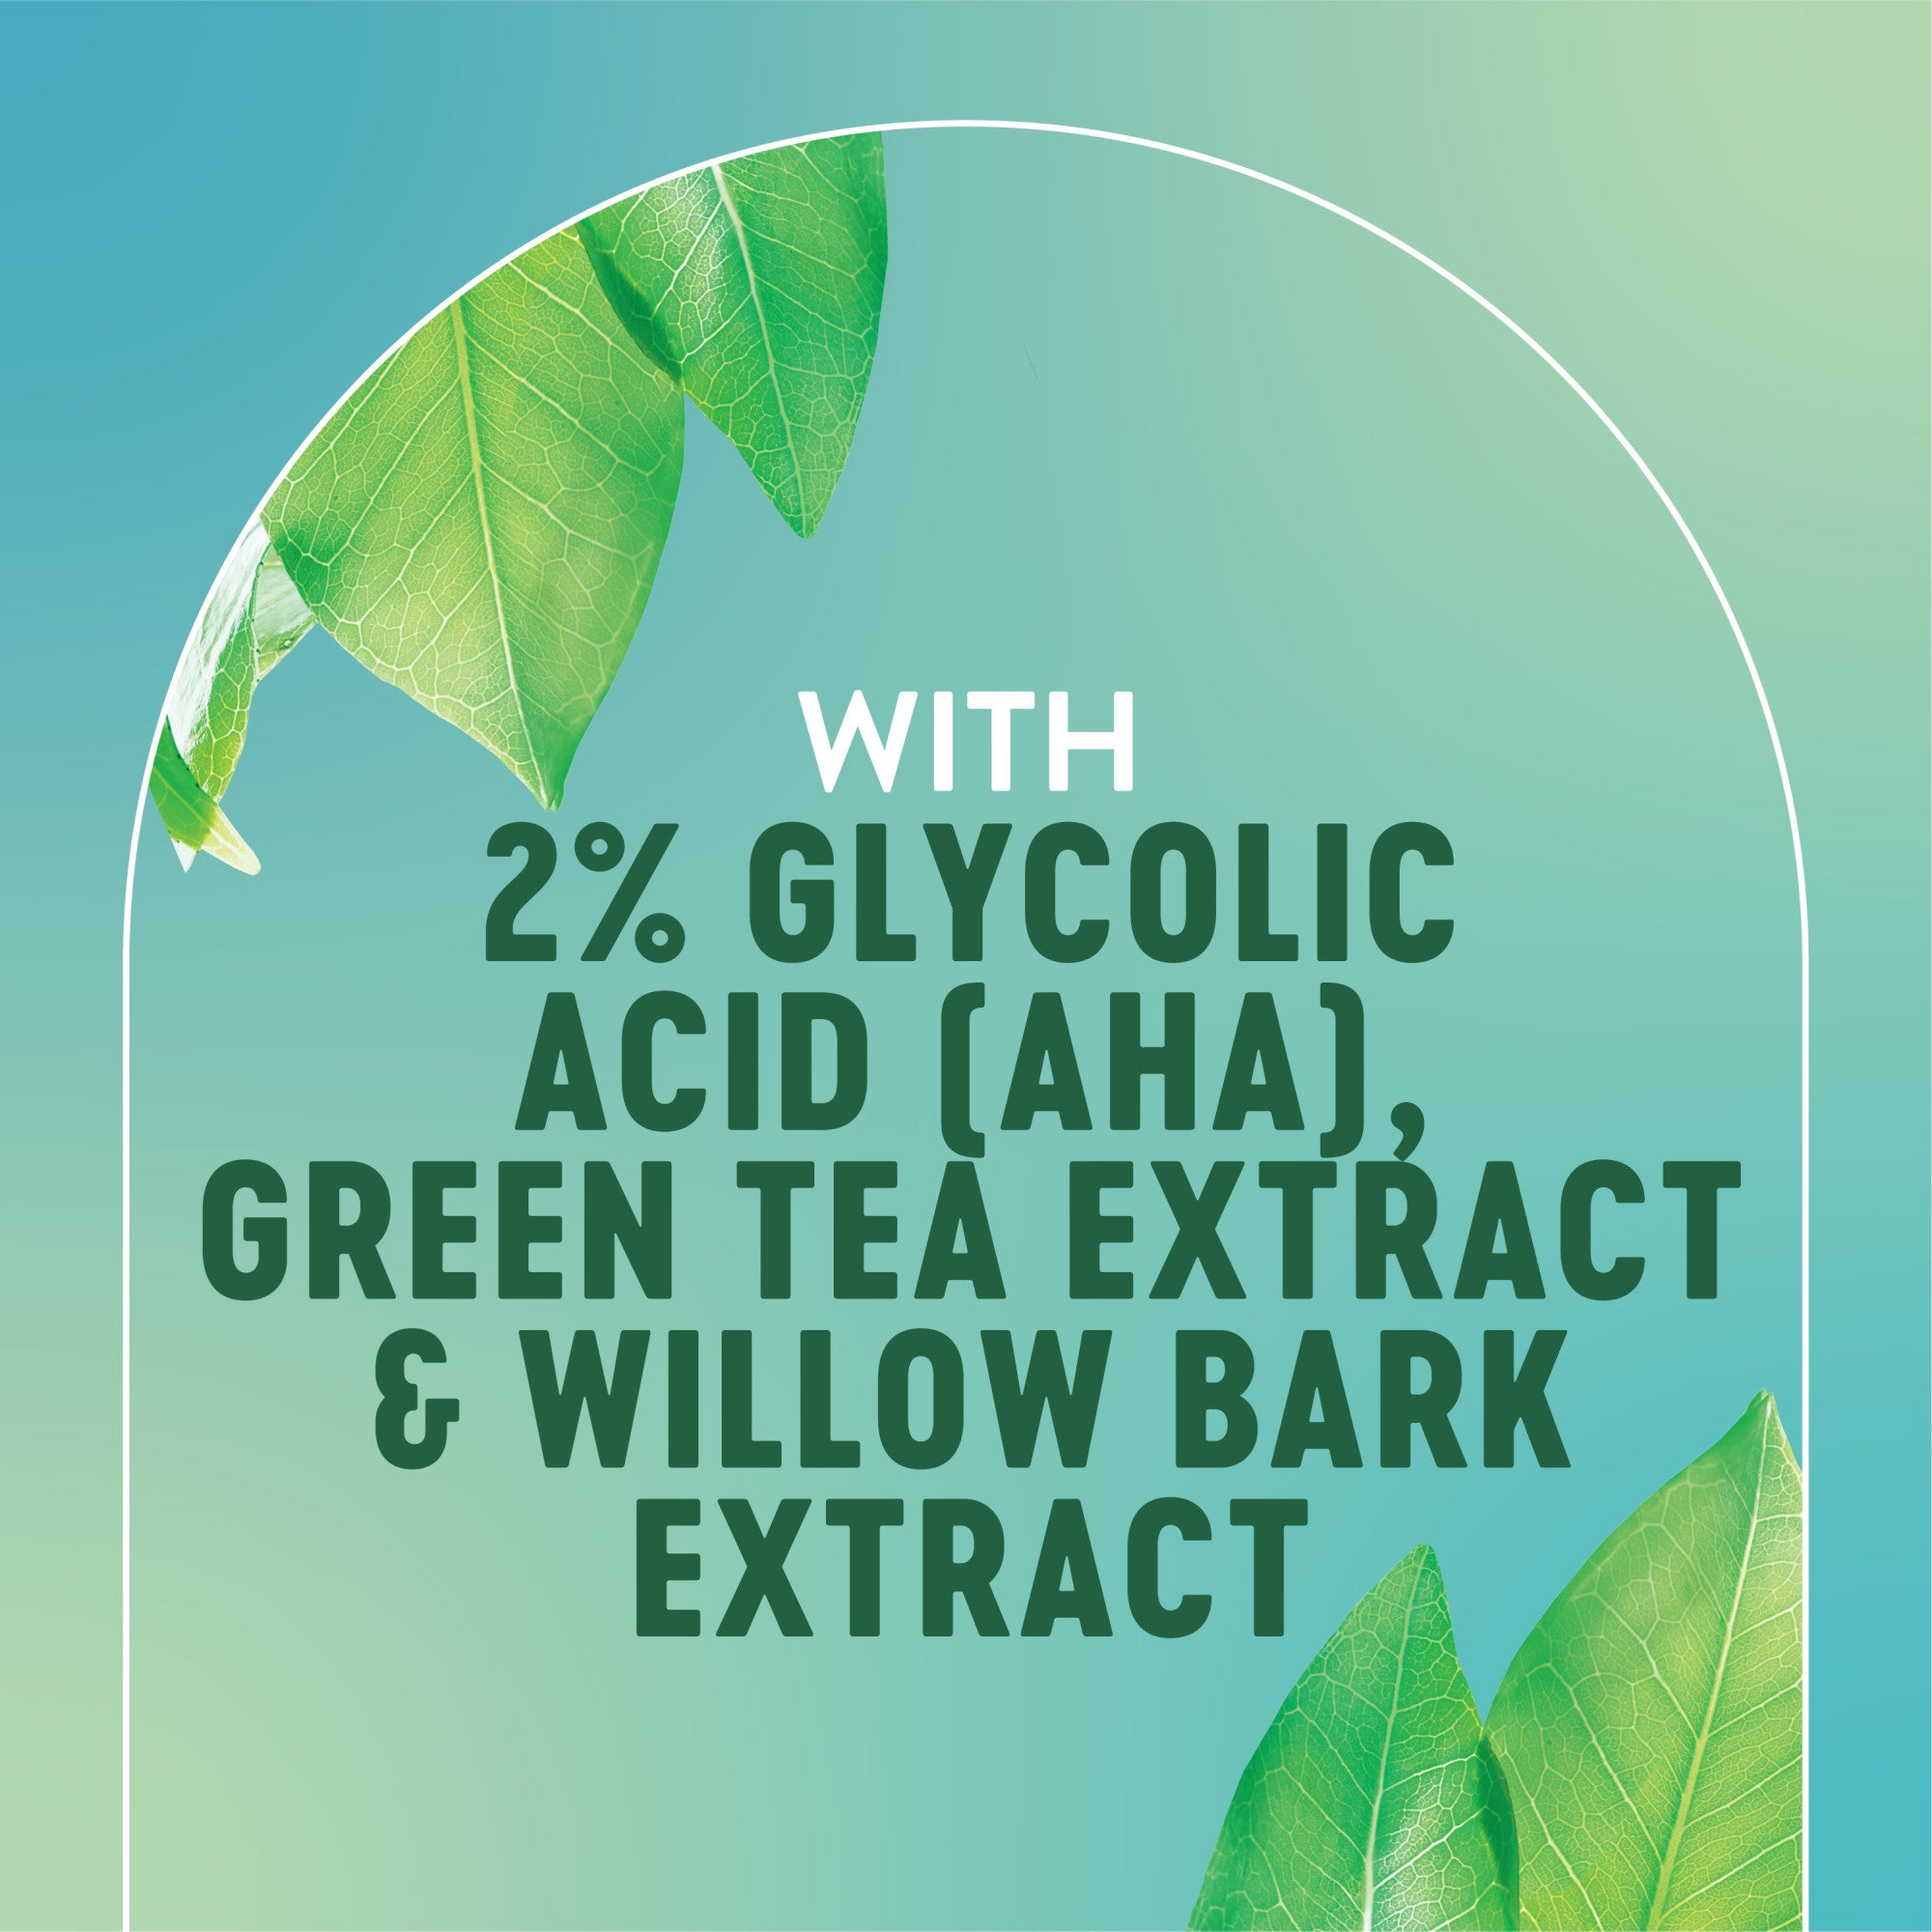 With 2% glycolic acid (AHA), green tea extract and willow bark extract.